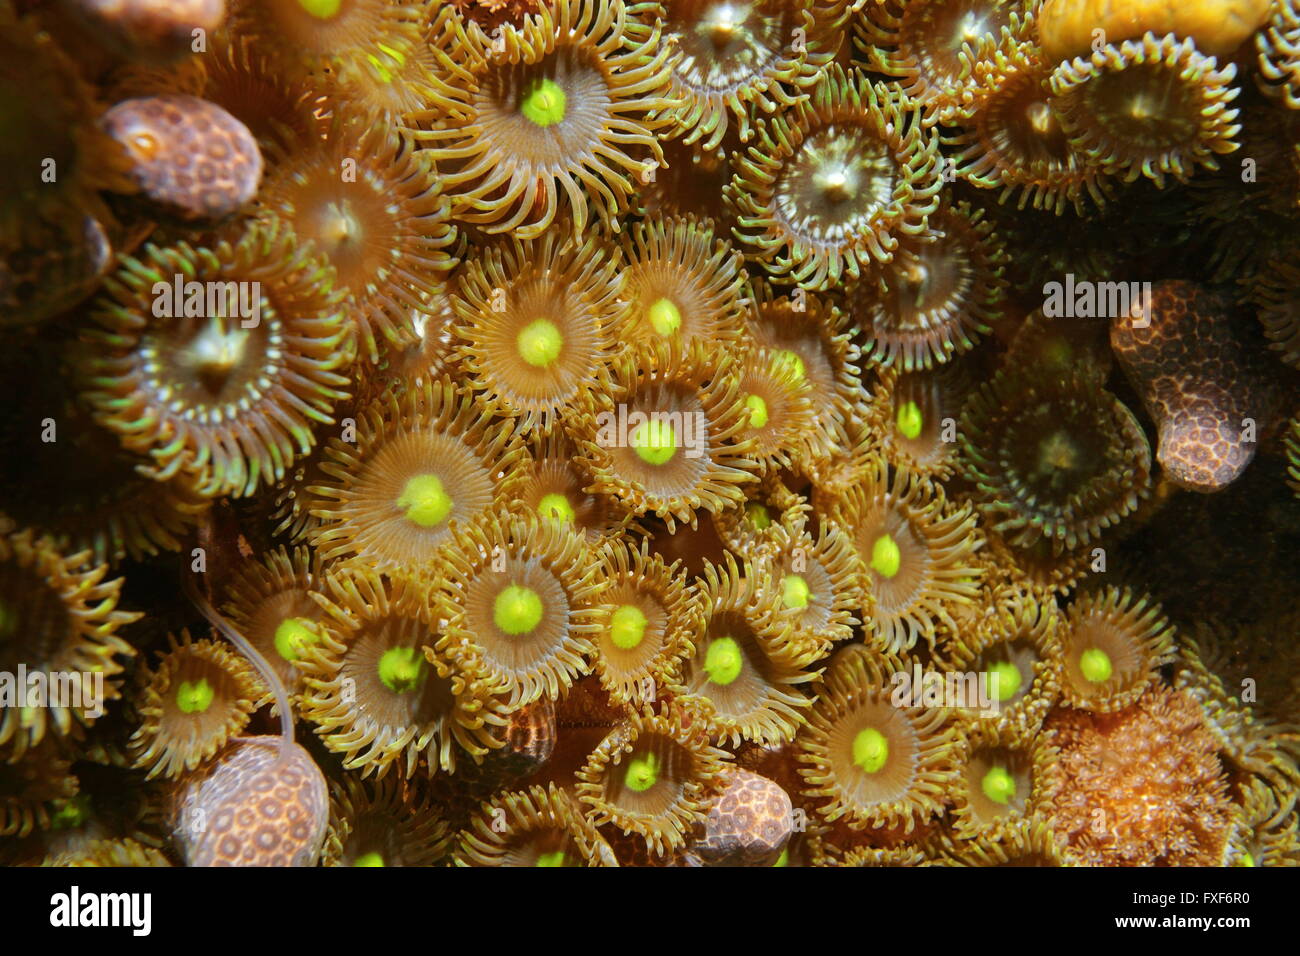 Colony of mat zoanthids, Zoanthus pulchellus, close up, underwater marine life, Caribbean sea Stock Photo